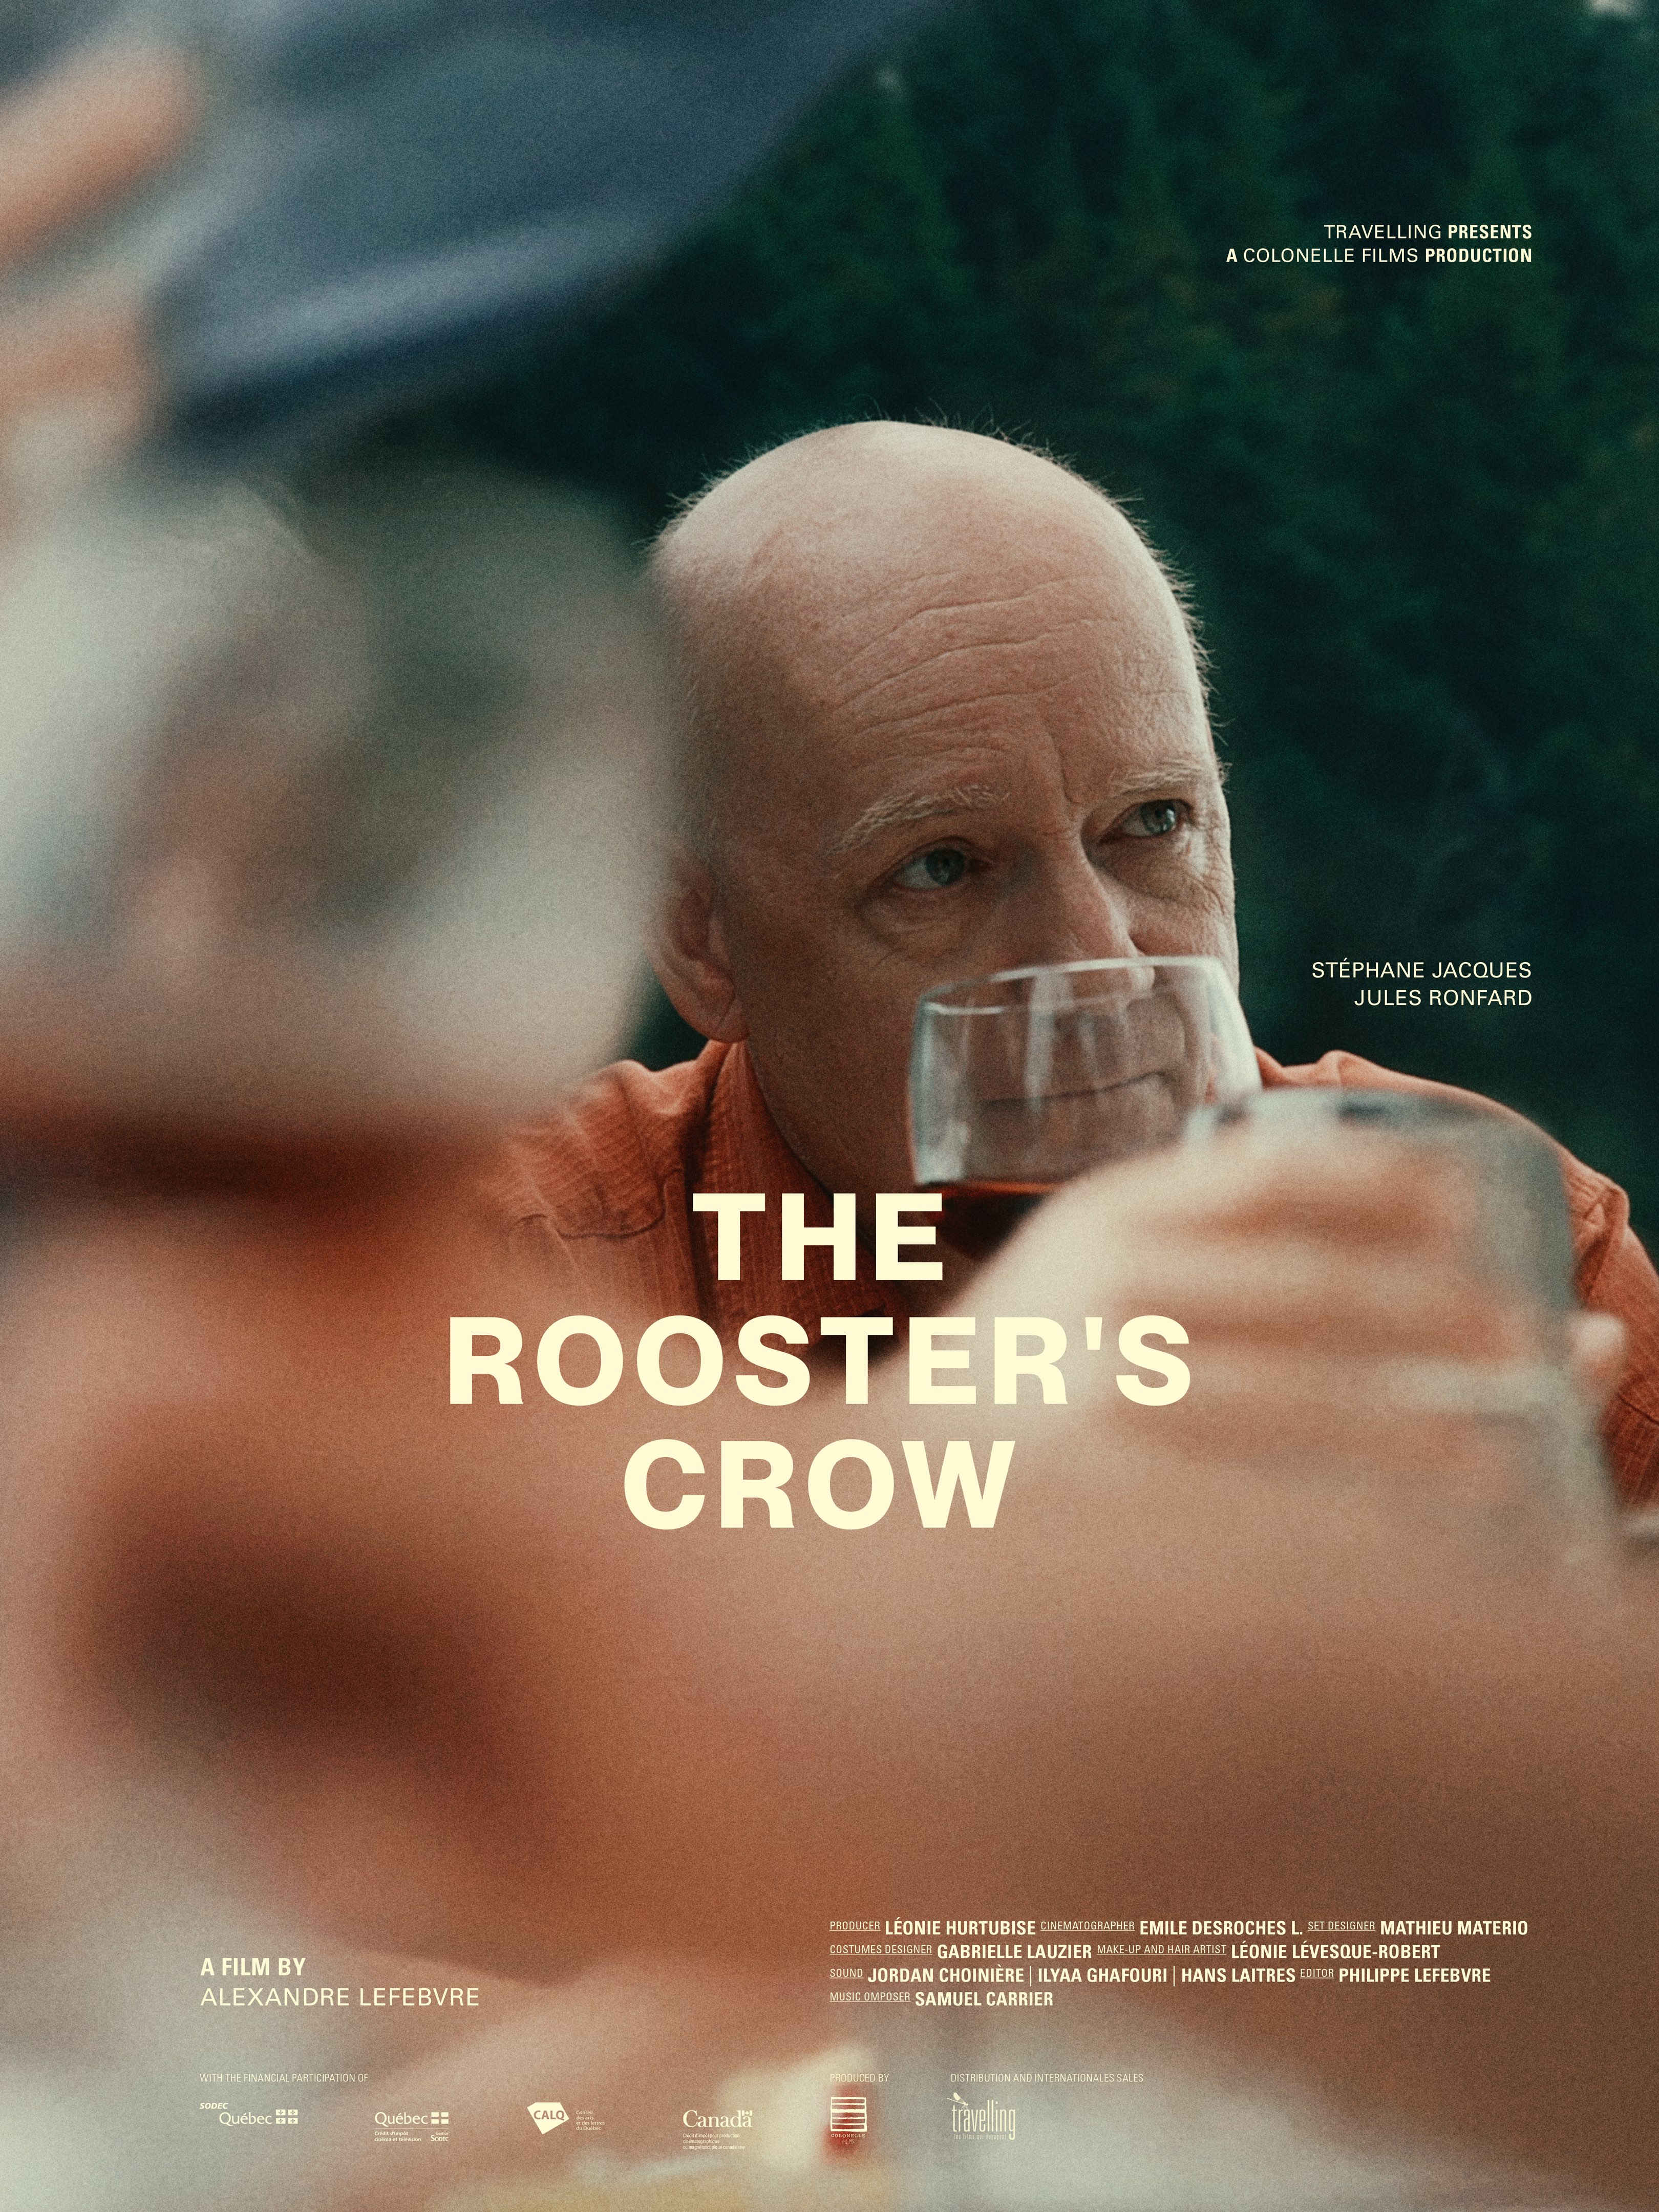 The Rooster's Crow